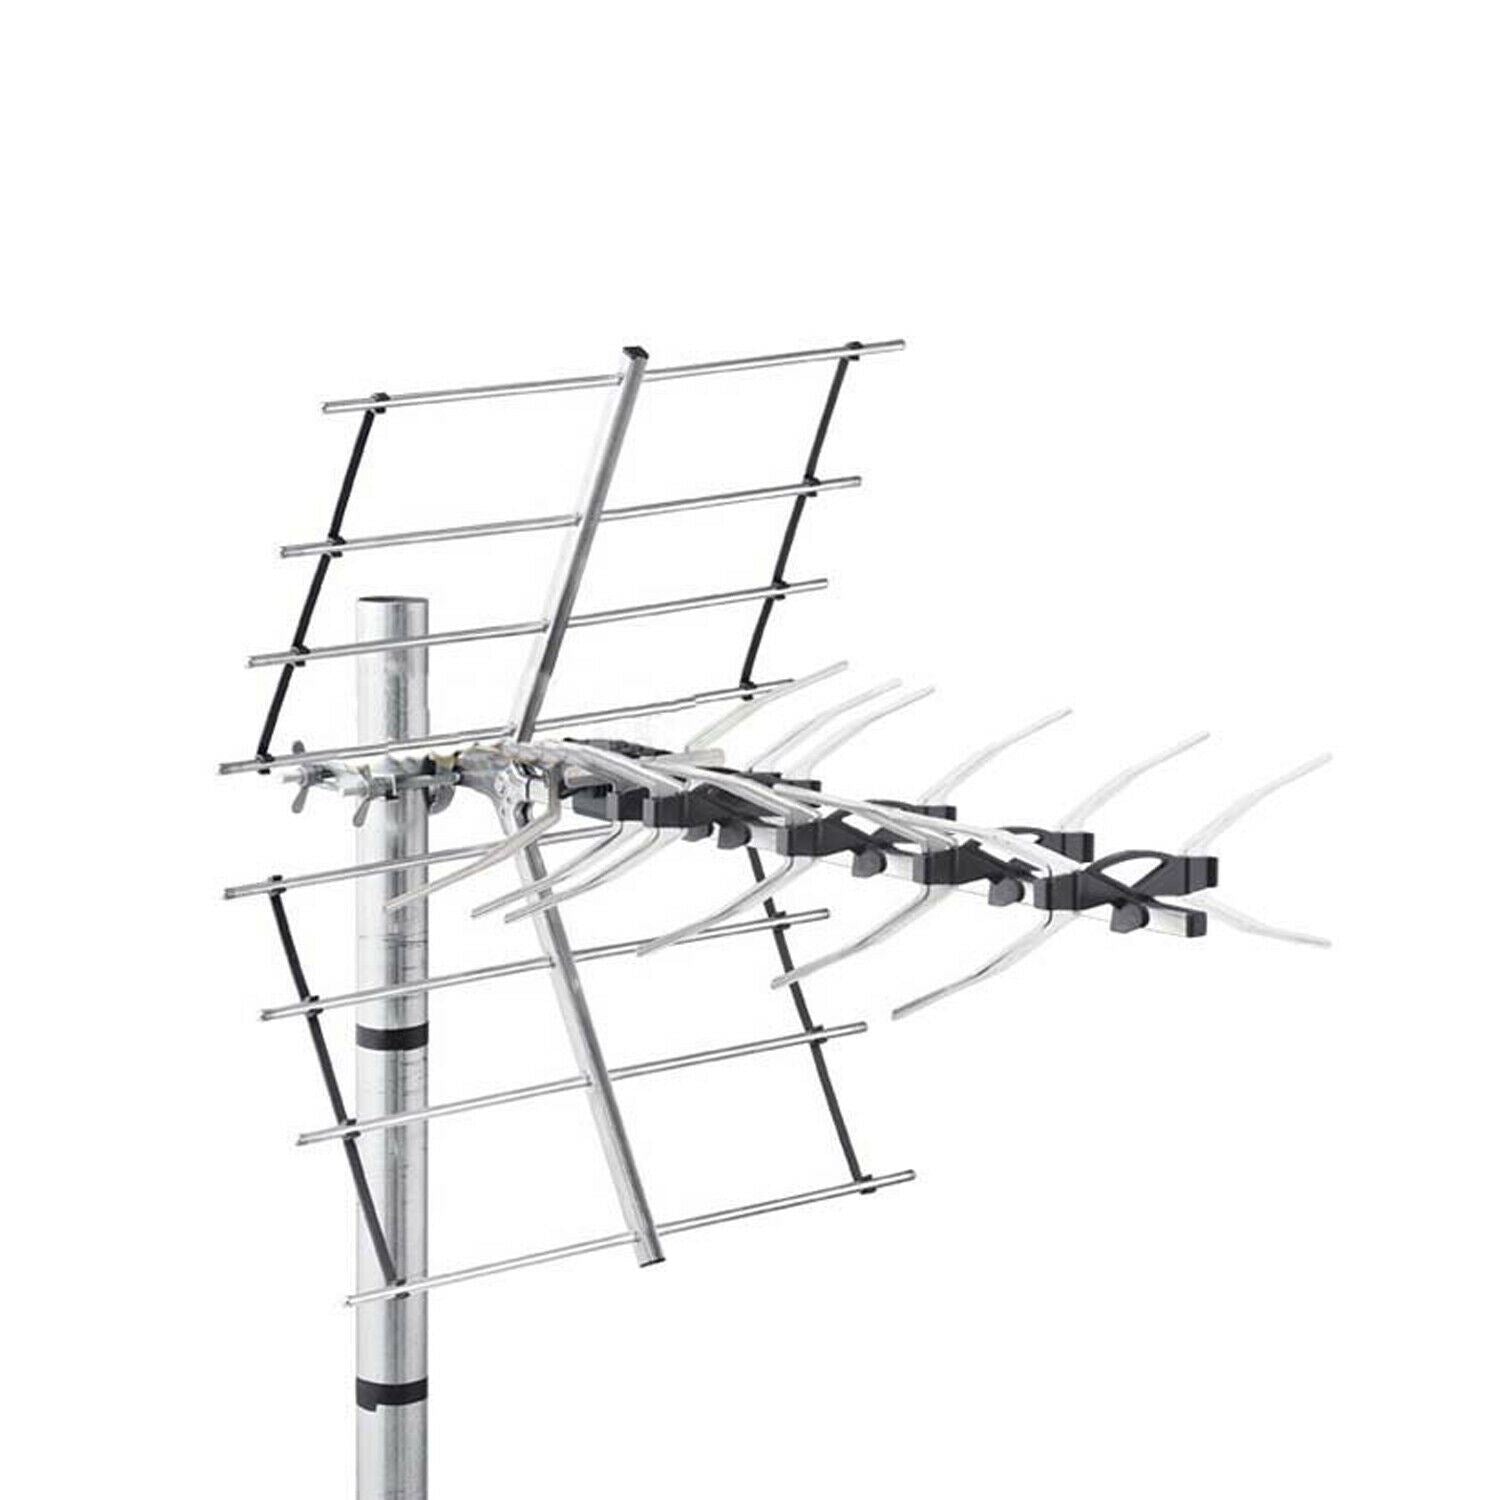 32 Element UHF TV Aerial for Saorview Mounting Bracket